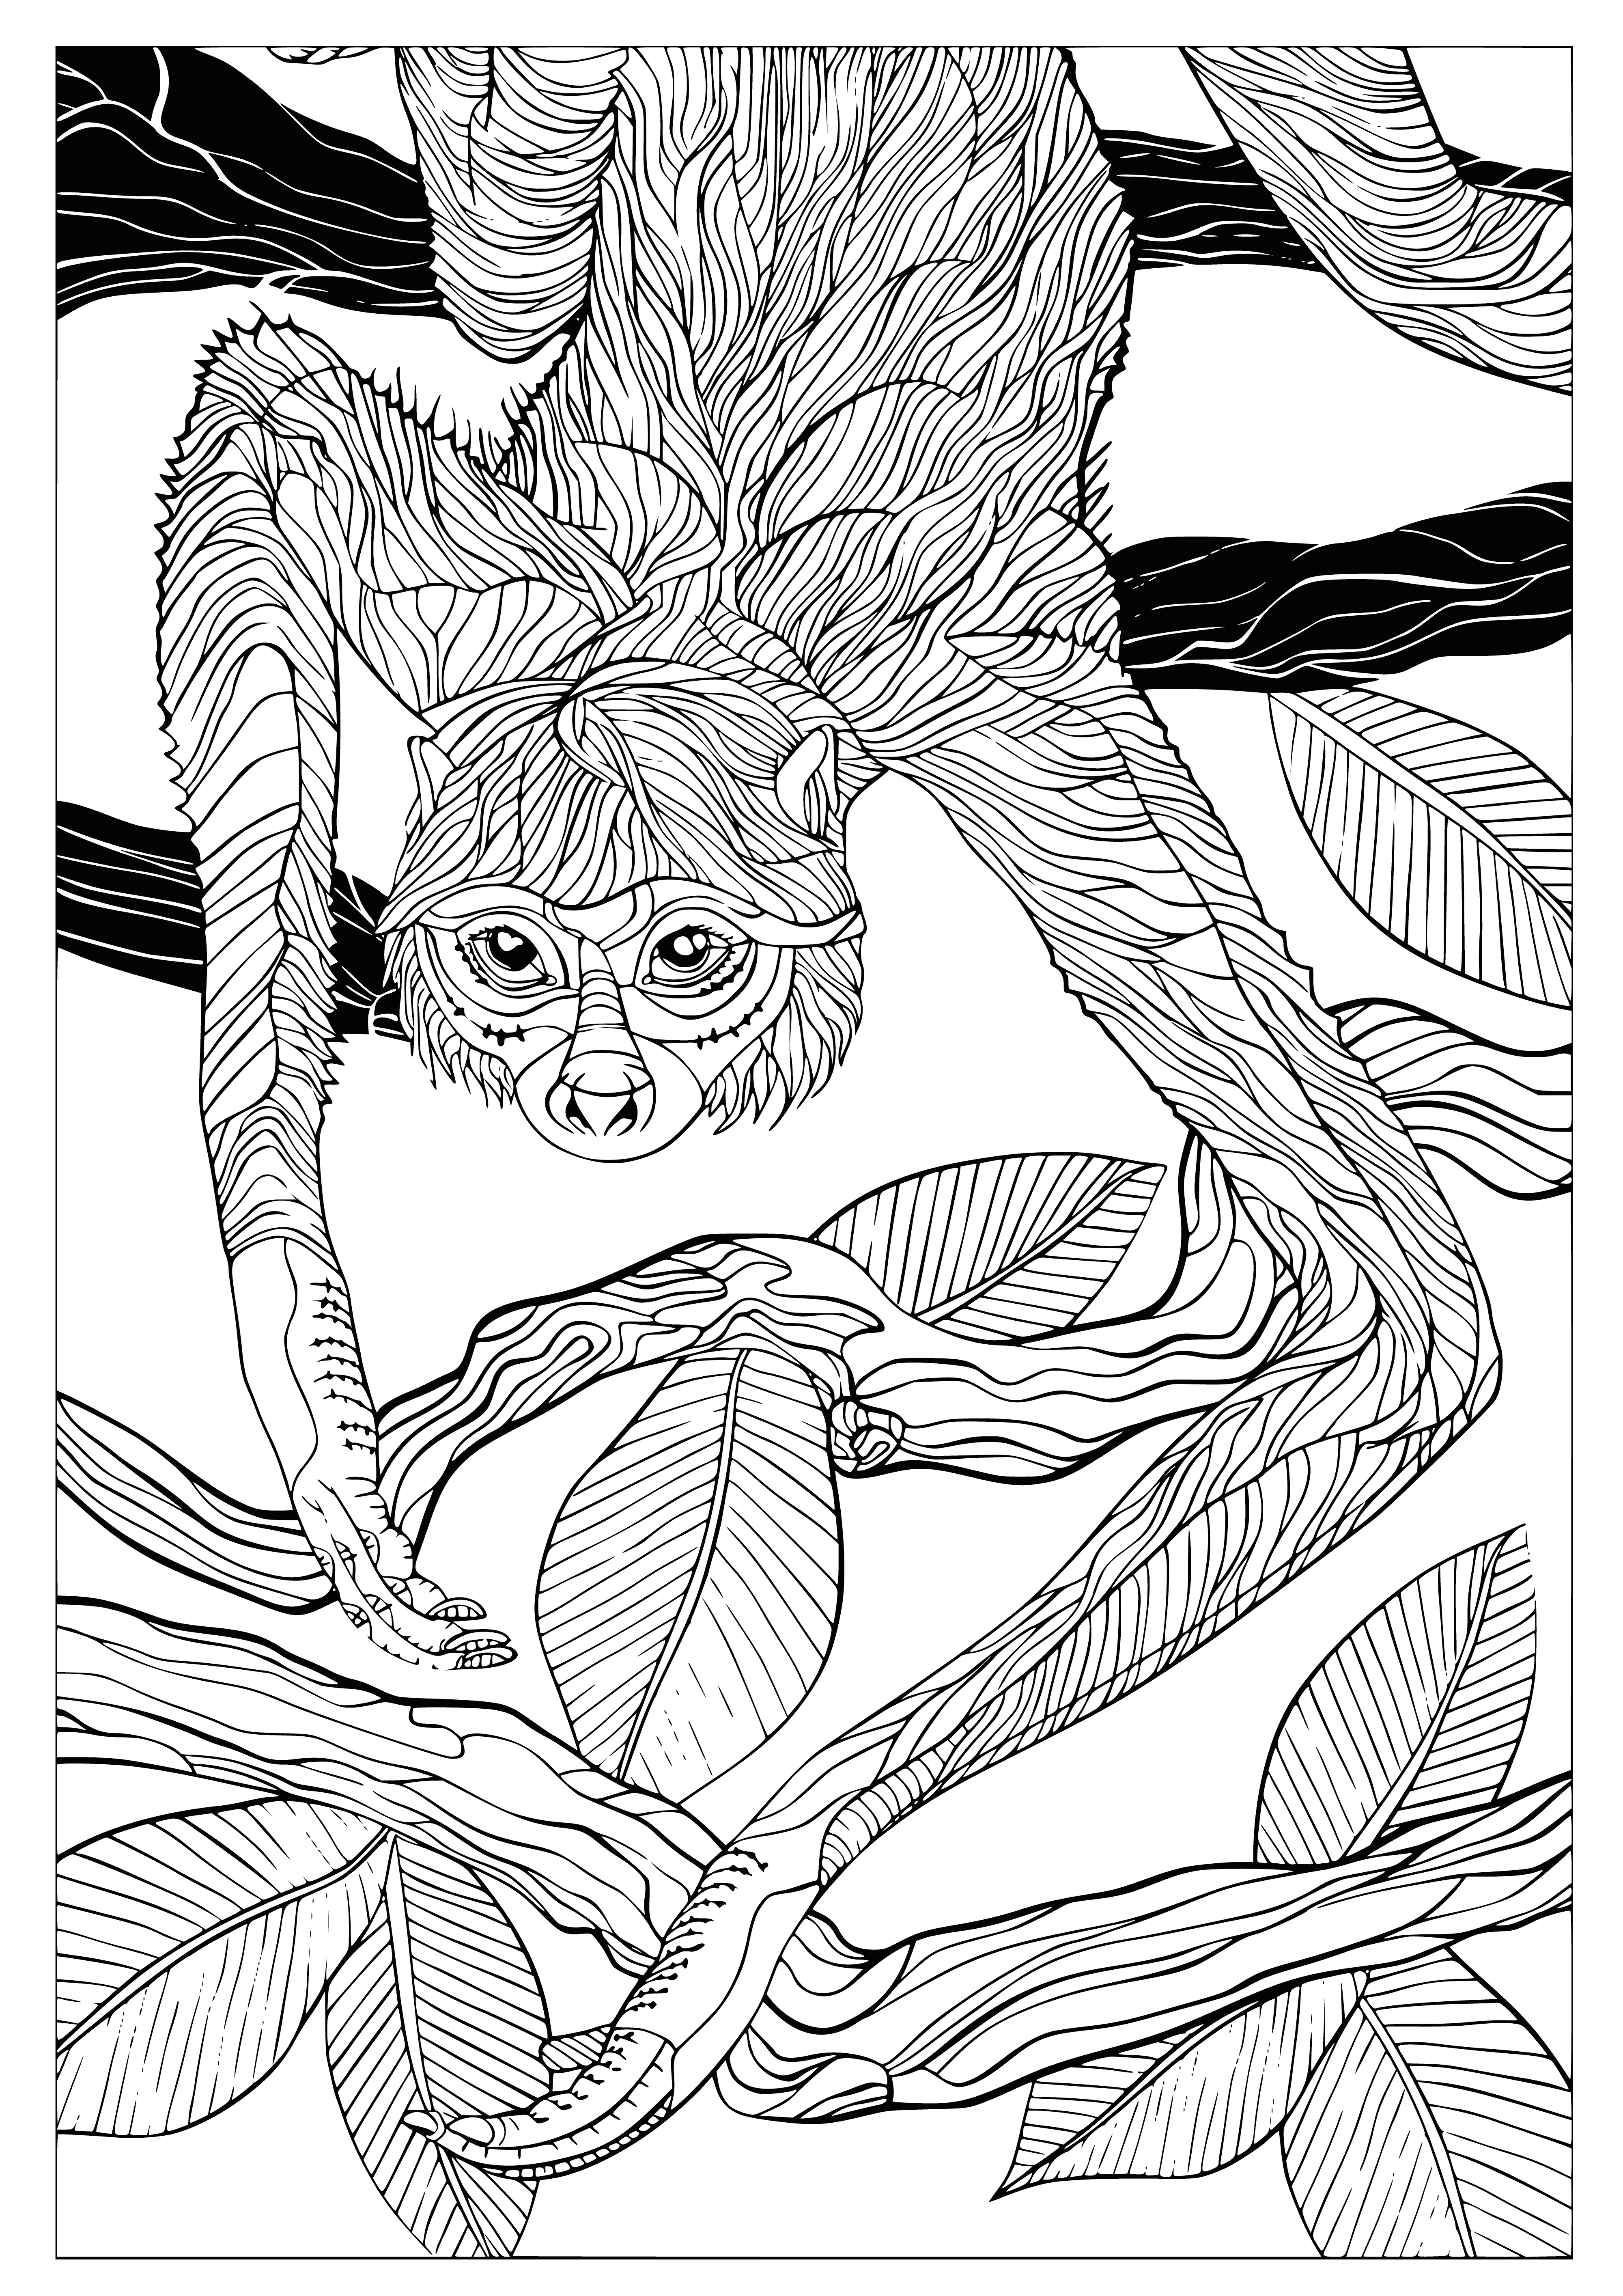 coloring page: Color an adorable sloth hanging from a tree surrounded by leaves. Brown body & white face! #Animals #coloring